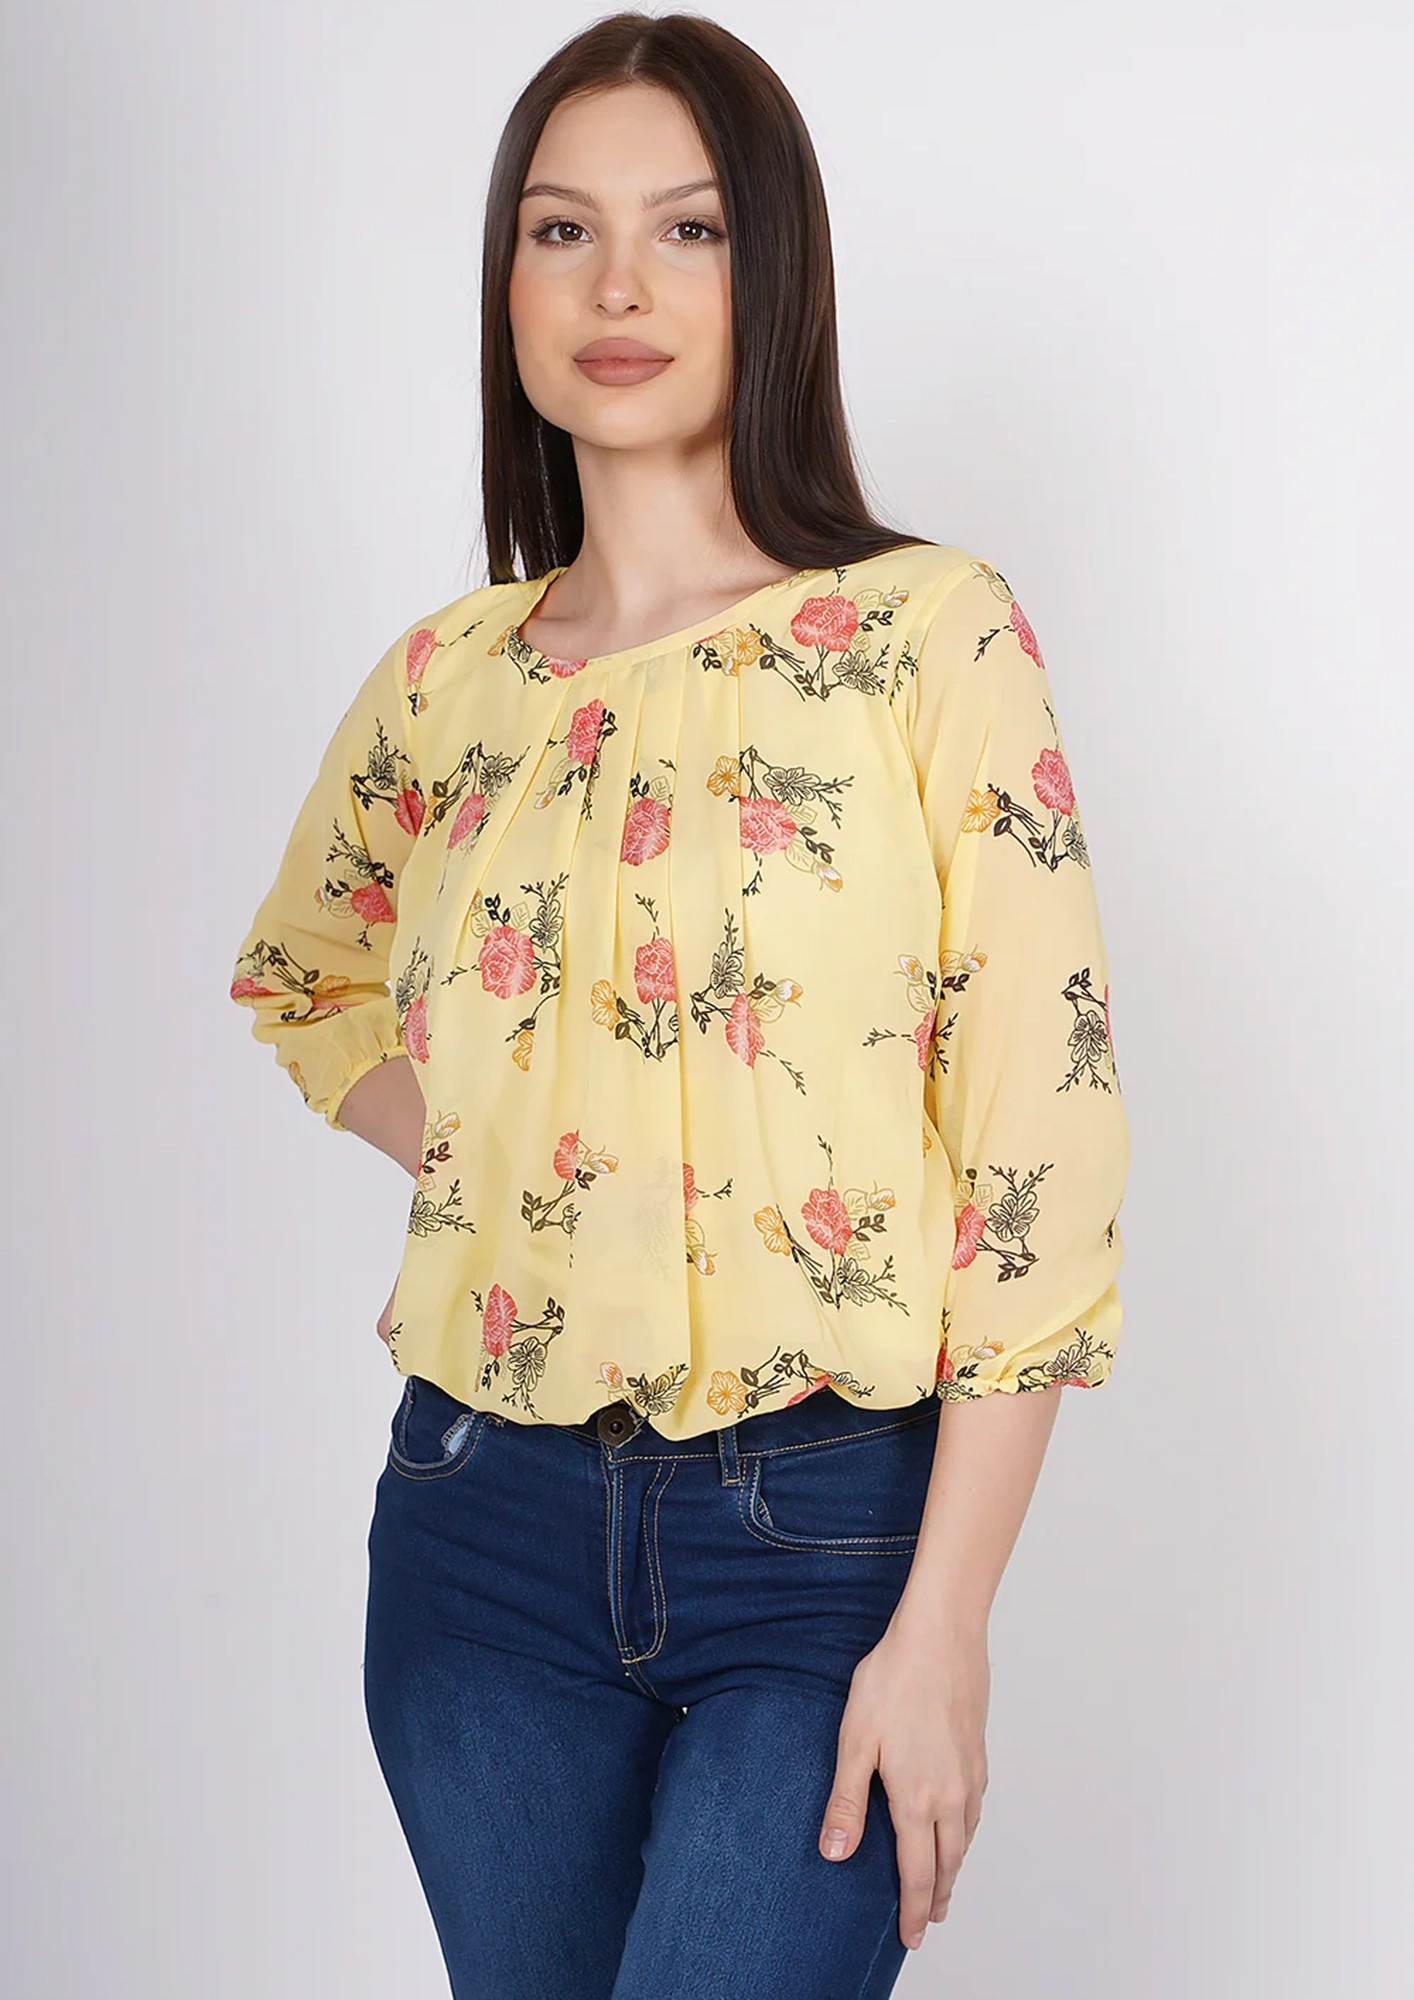 TAGGD Round Neck Ditsy Floral Top